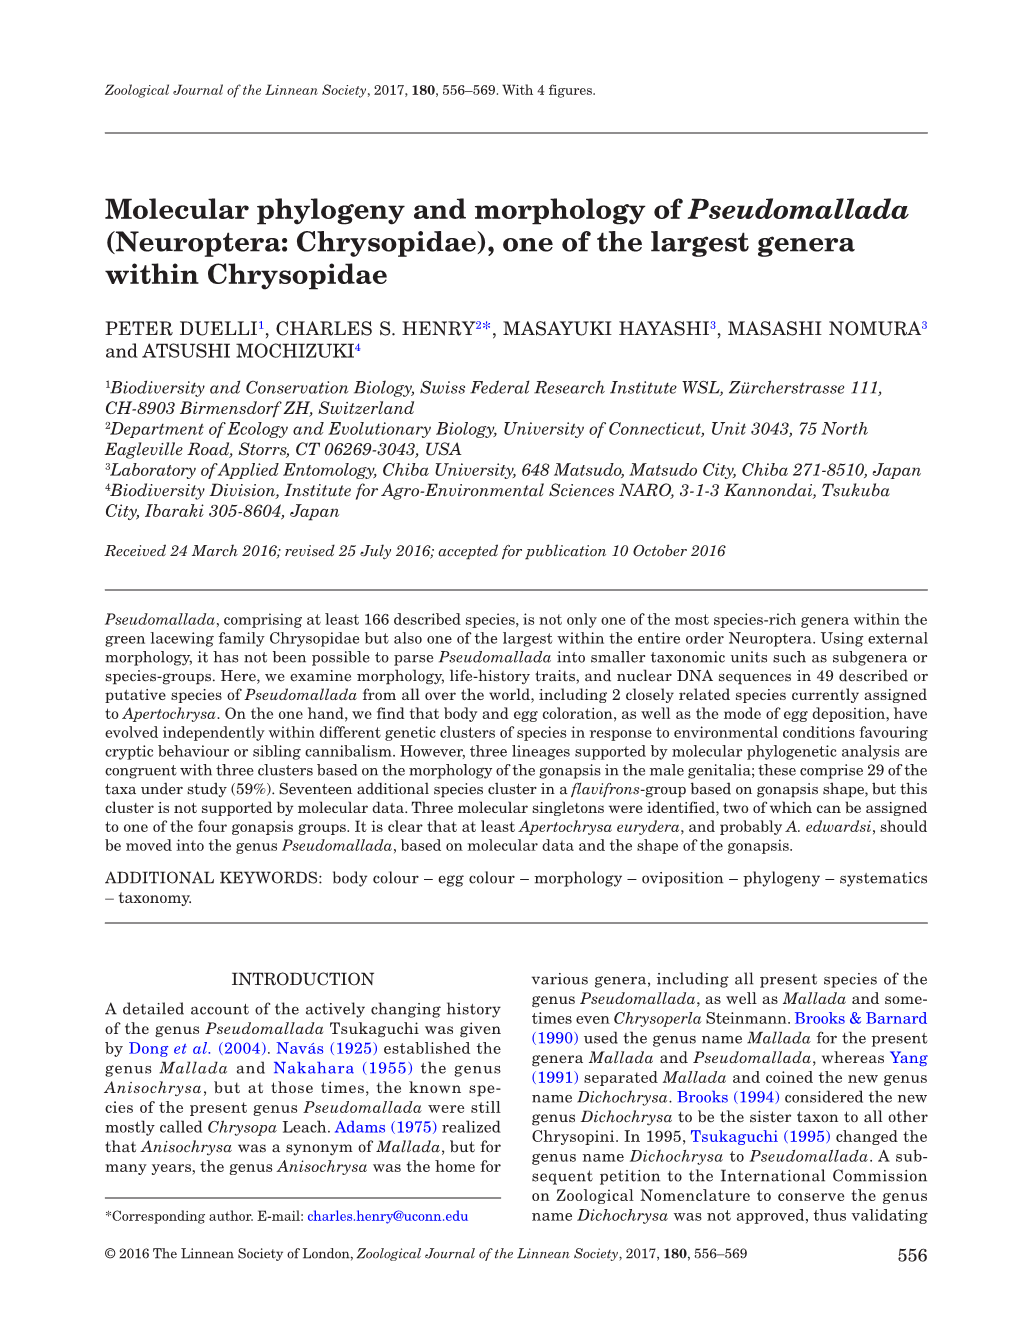 Molecular Phylogeny and Morphology of Pseudomallada That Were Difficult to Amplify with These Primers